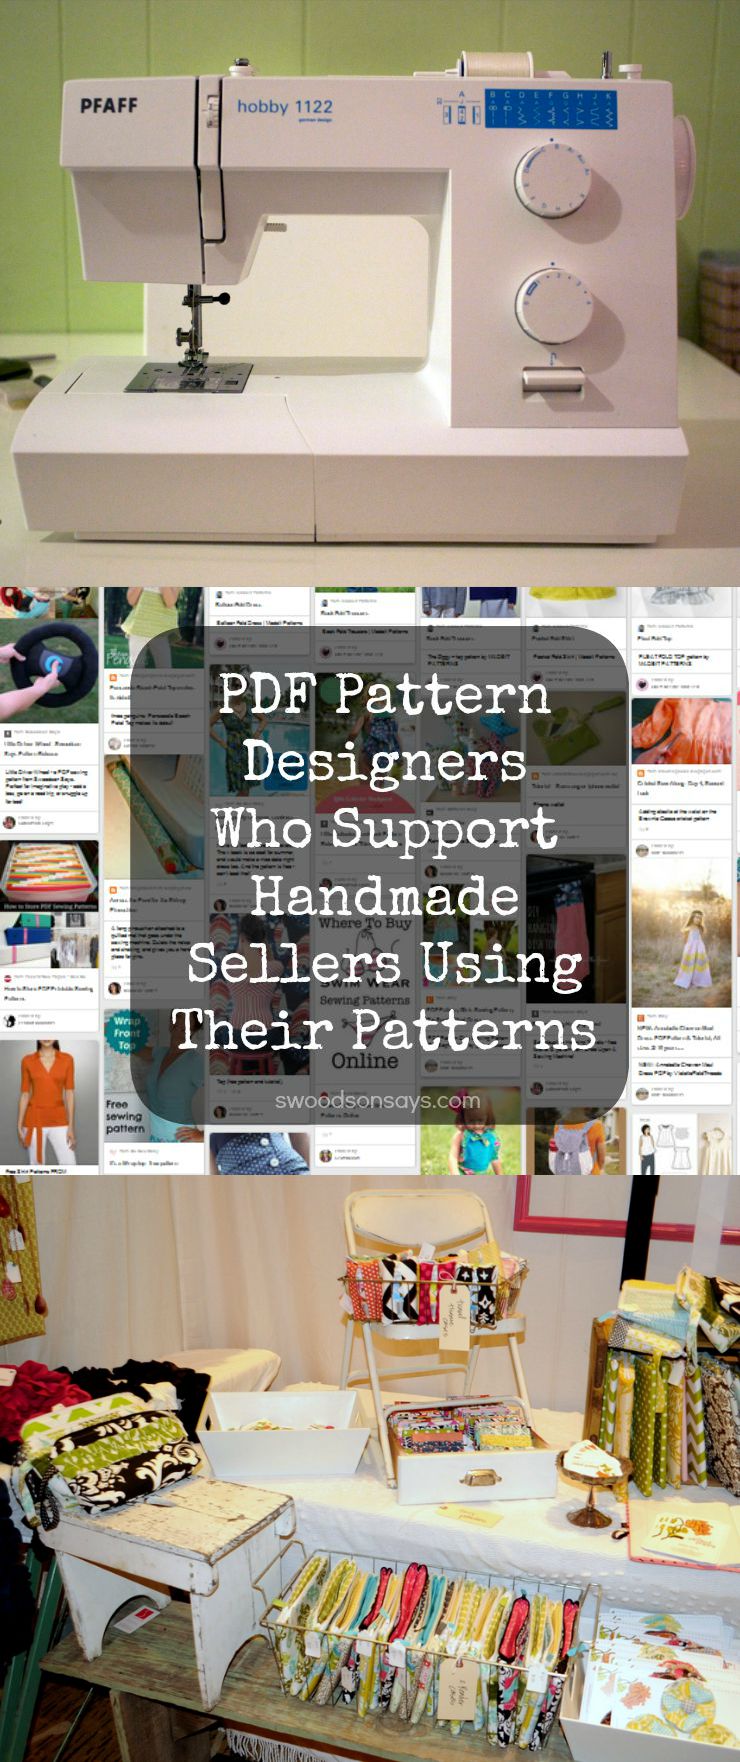 PDF Pattern Designers List - Designers who encourage handmade sellers to use their patterns for craft shows and Etsy shops.